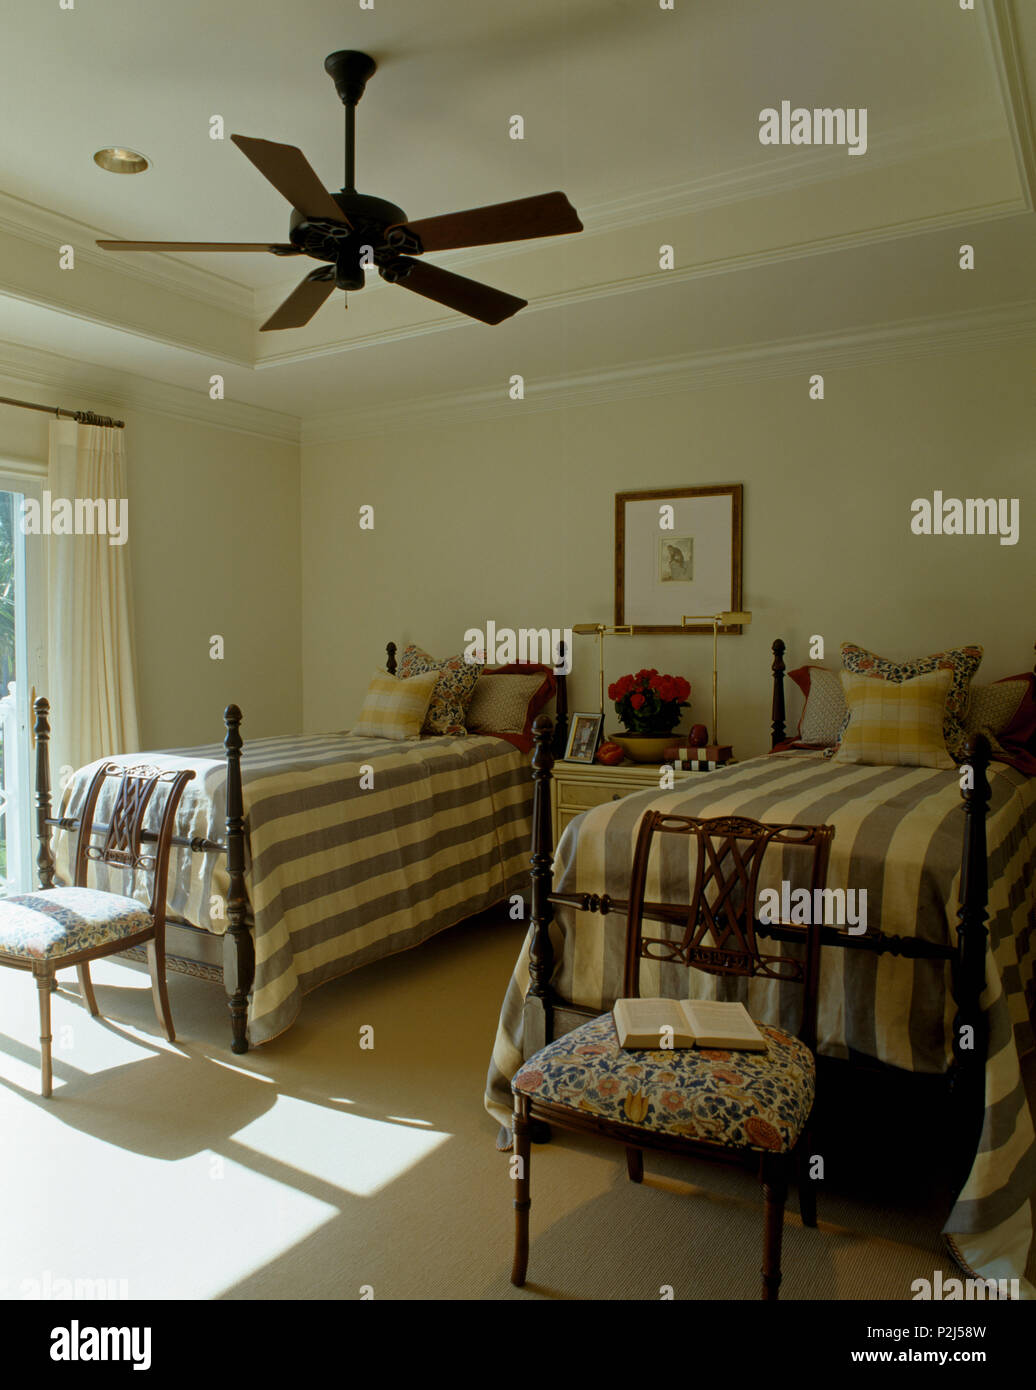 Electric ceiling fan above twin beds with turned spindles and wide-striped bed-covers in coastal bedroom Stock Photo